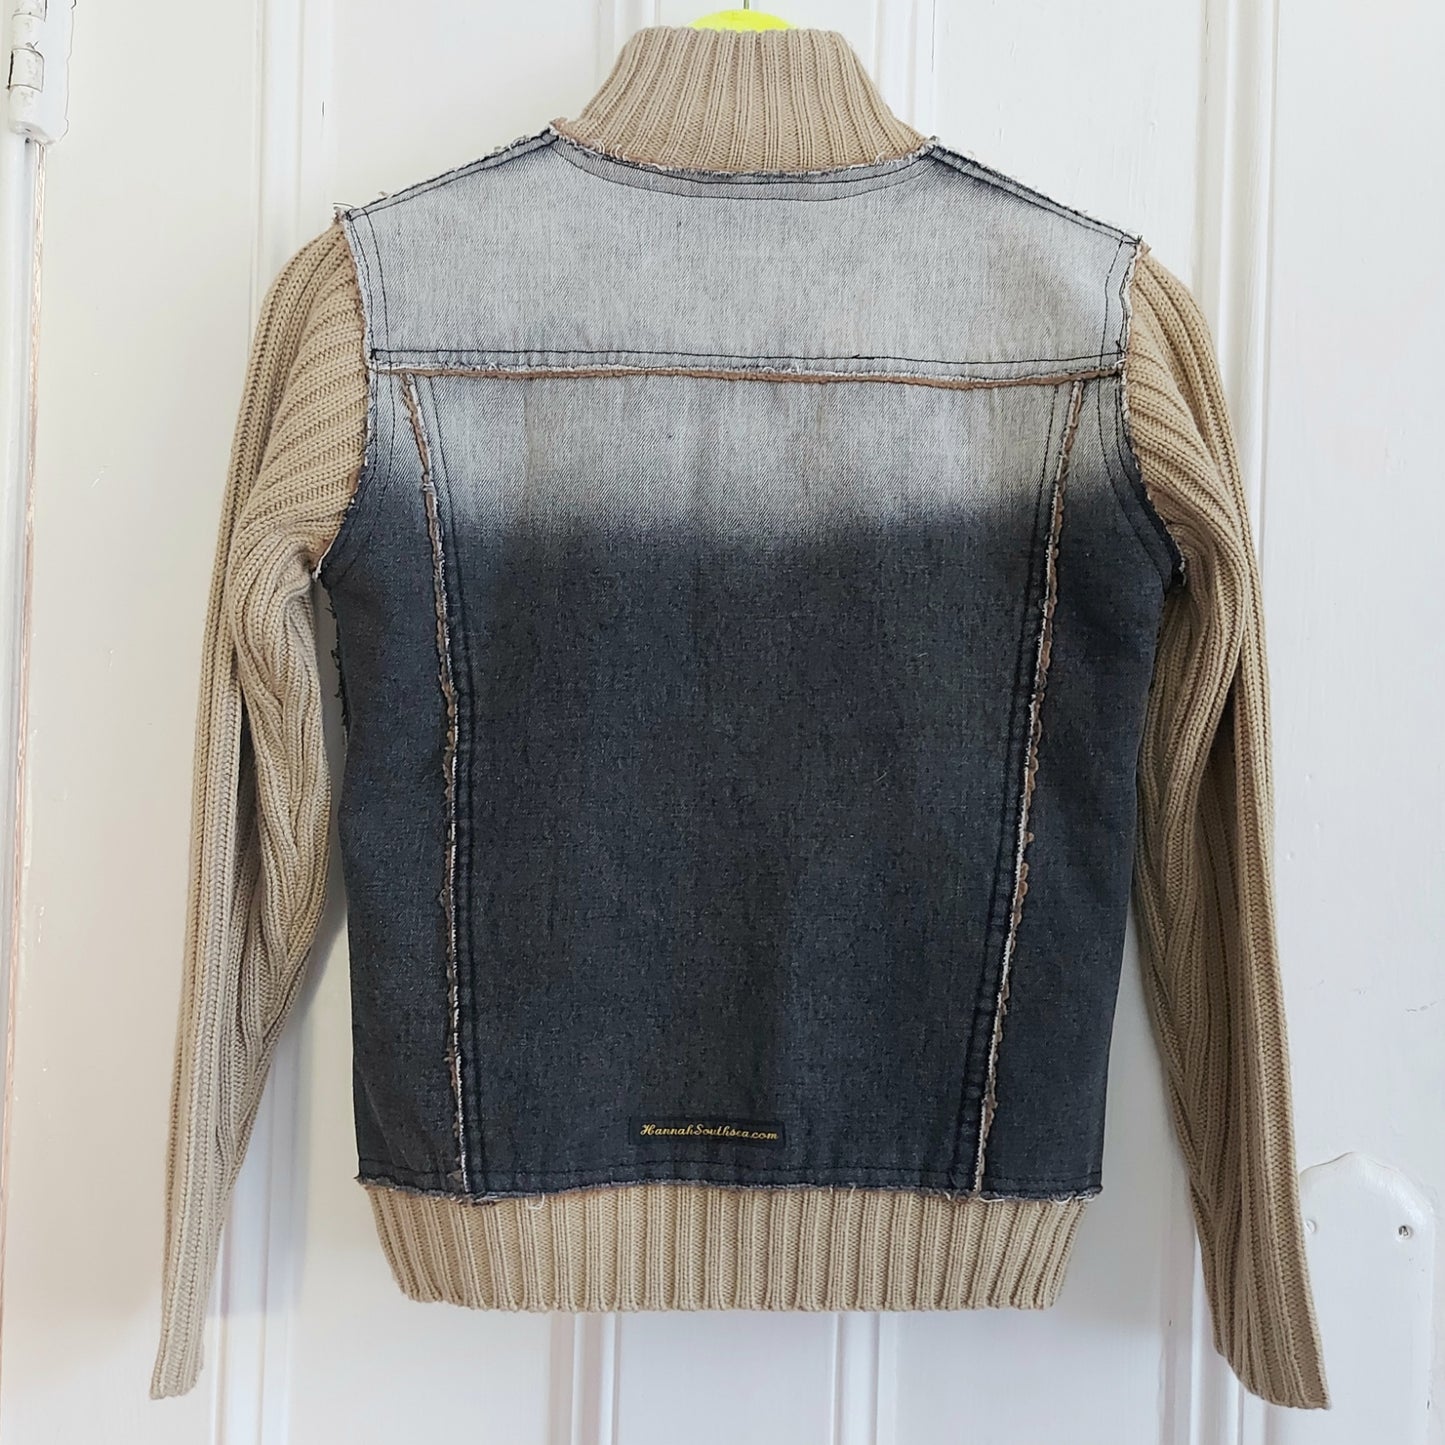 Fur Lined Denim Knitted Sleeve Top - Size Small